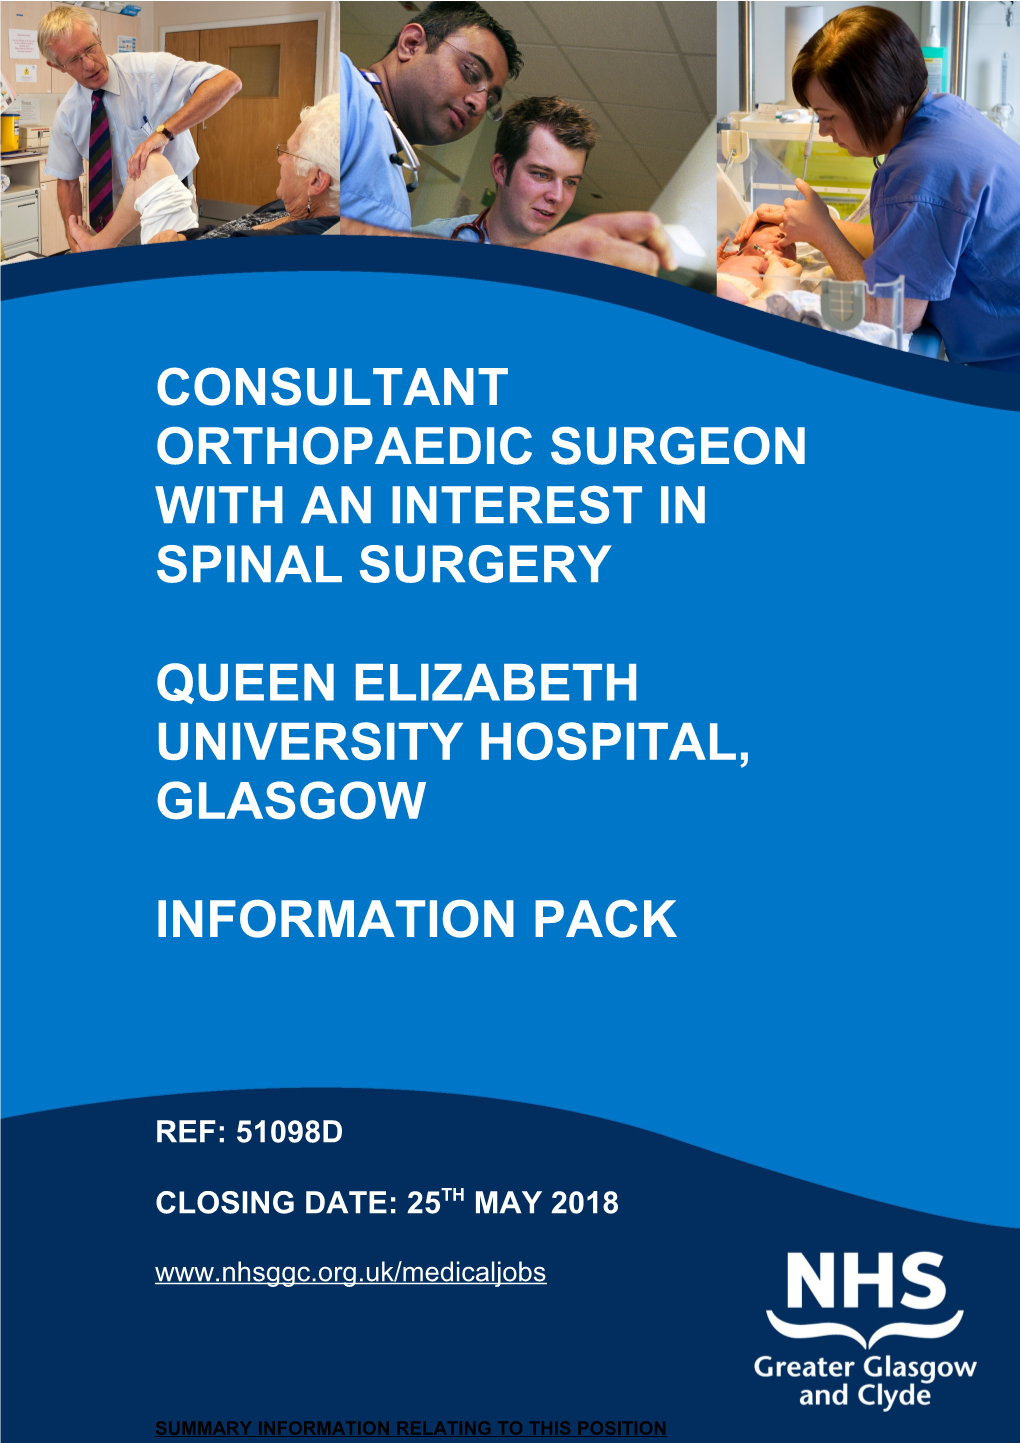 With an Interest in SPINAL SURGERY